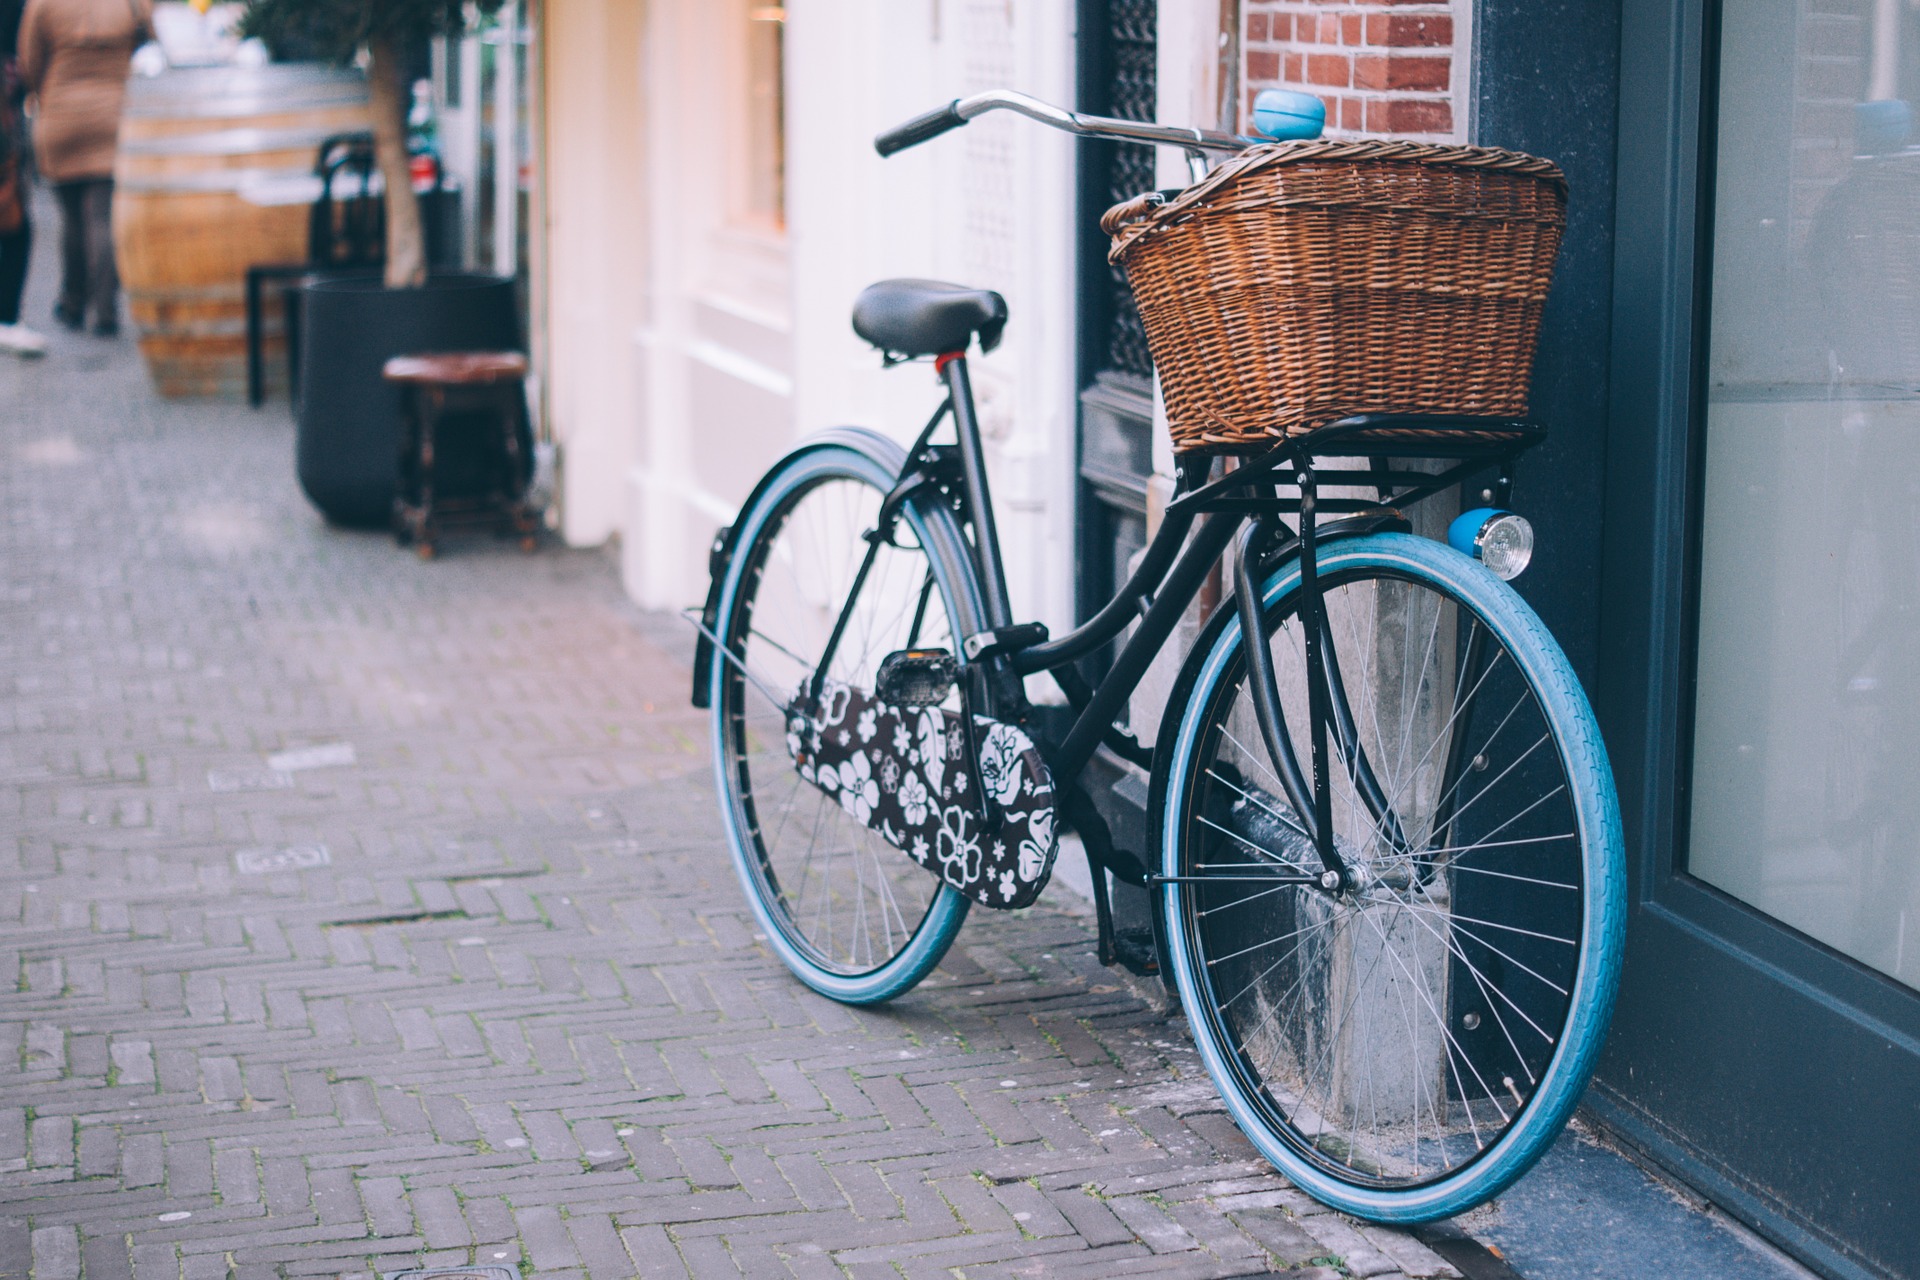 photo showing a bicycle with wicker pannier leaning against a wall in a street, cafe bar in the background